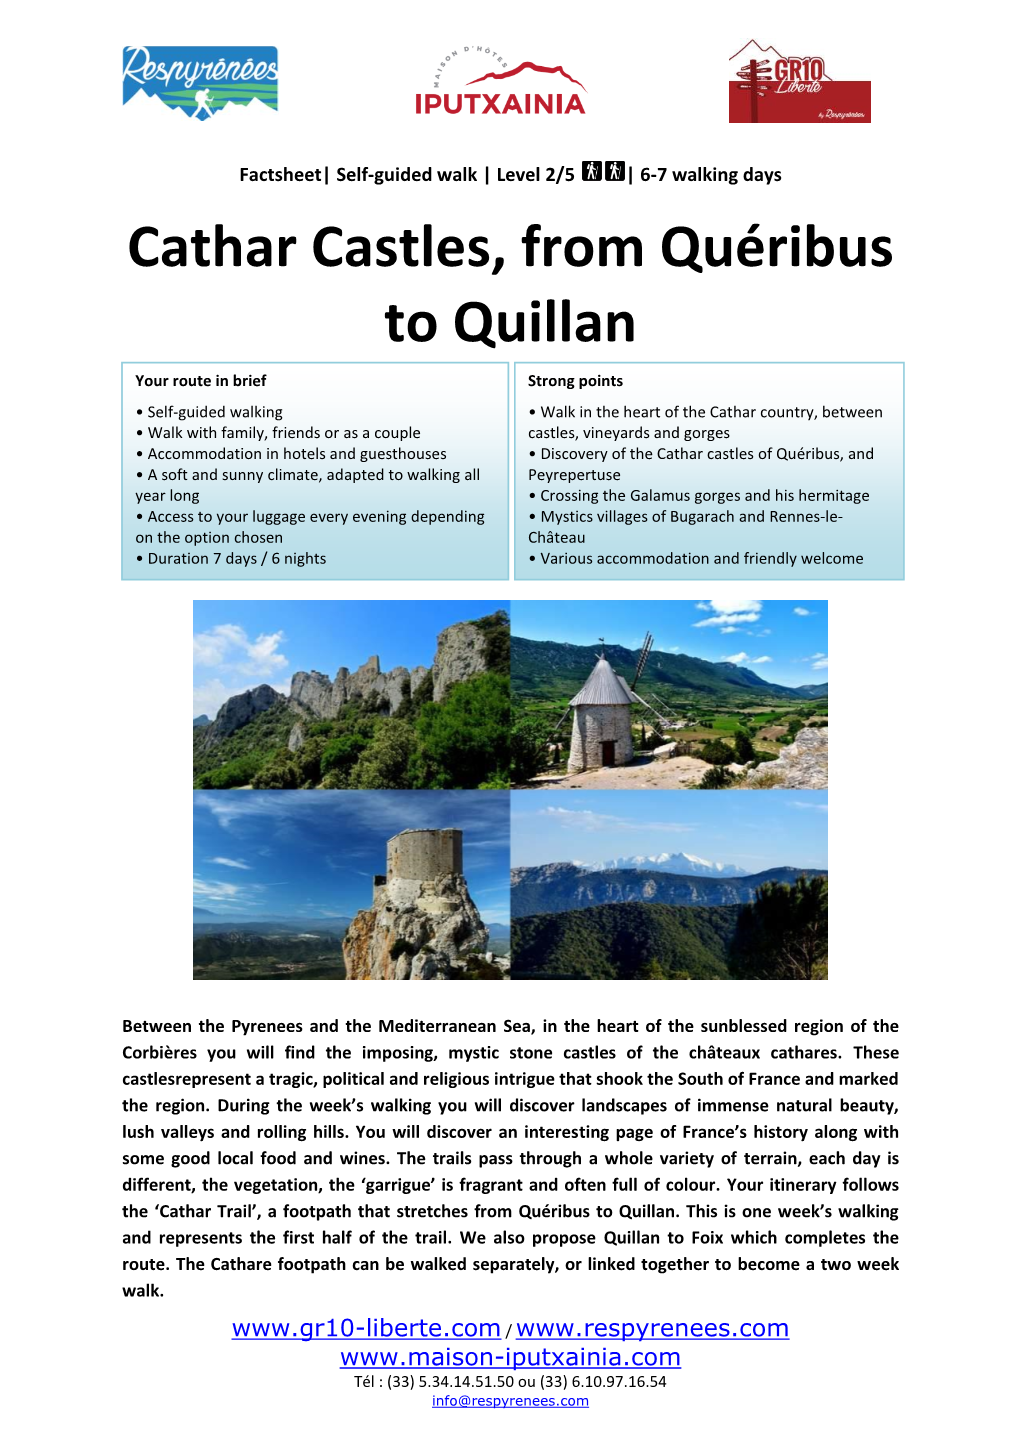 Cathar Castles, from Quéribus to Quillan